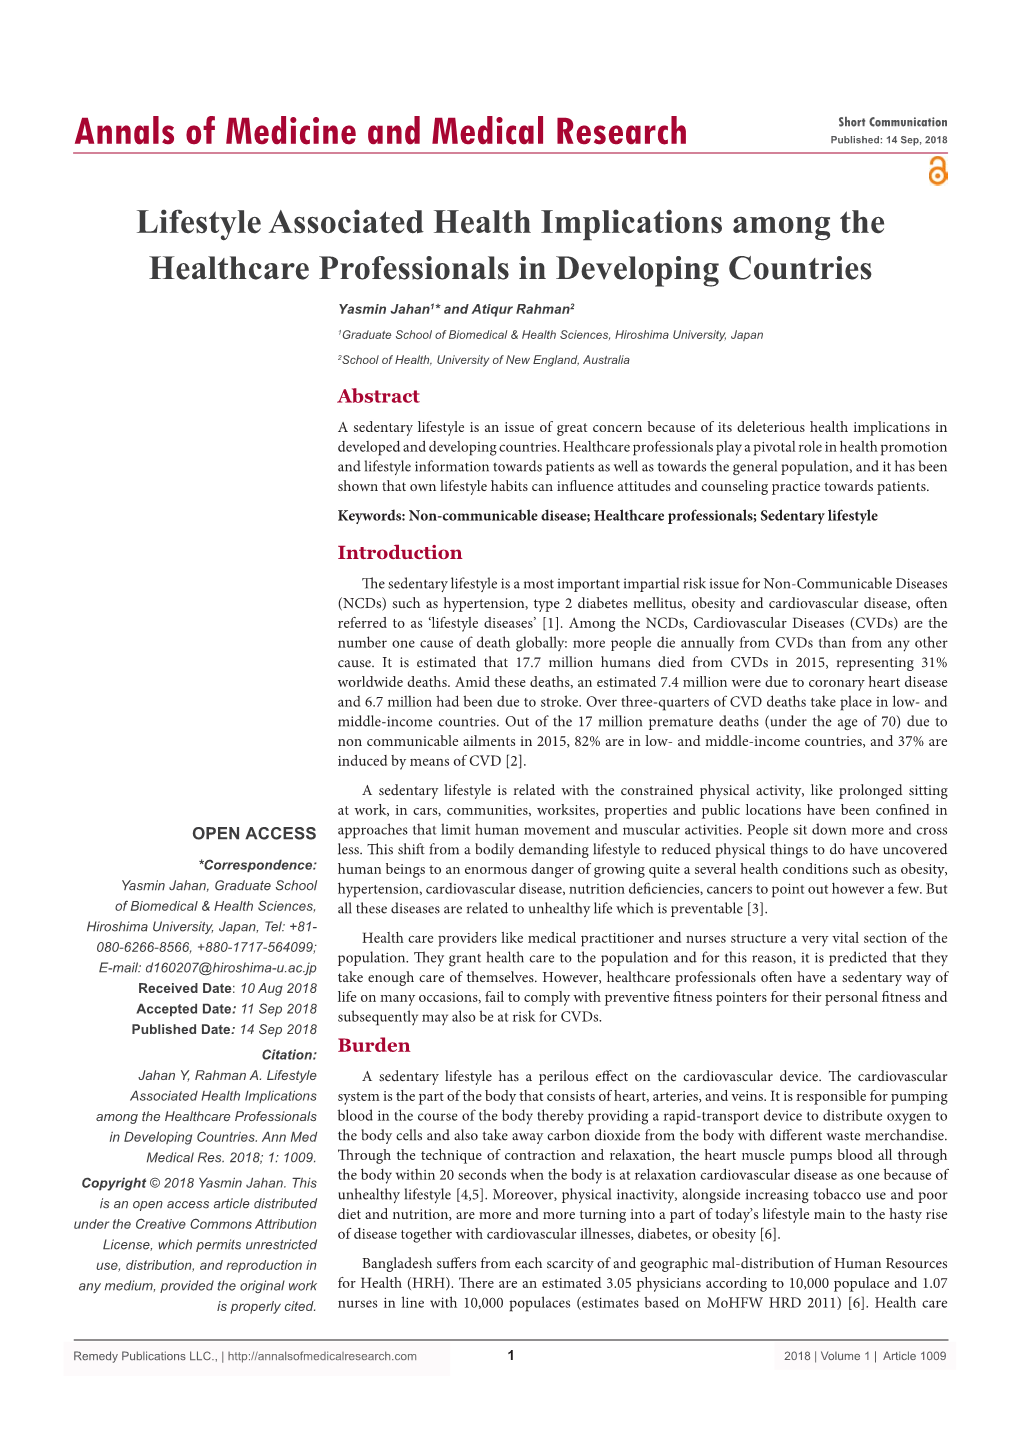 Lifestyle Associated Health Implications Among the Healthcare Professionals in Developing Countries